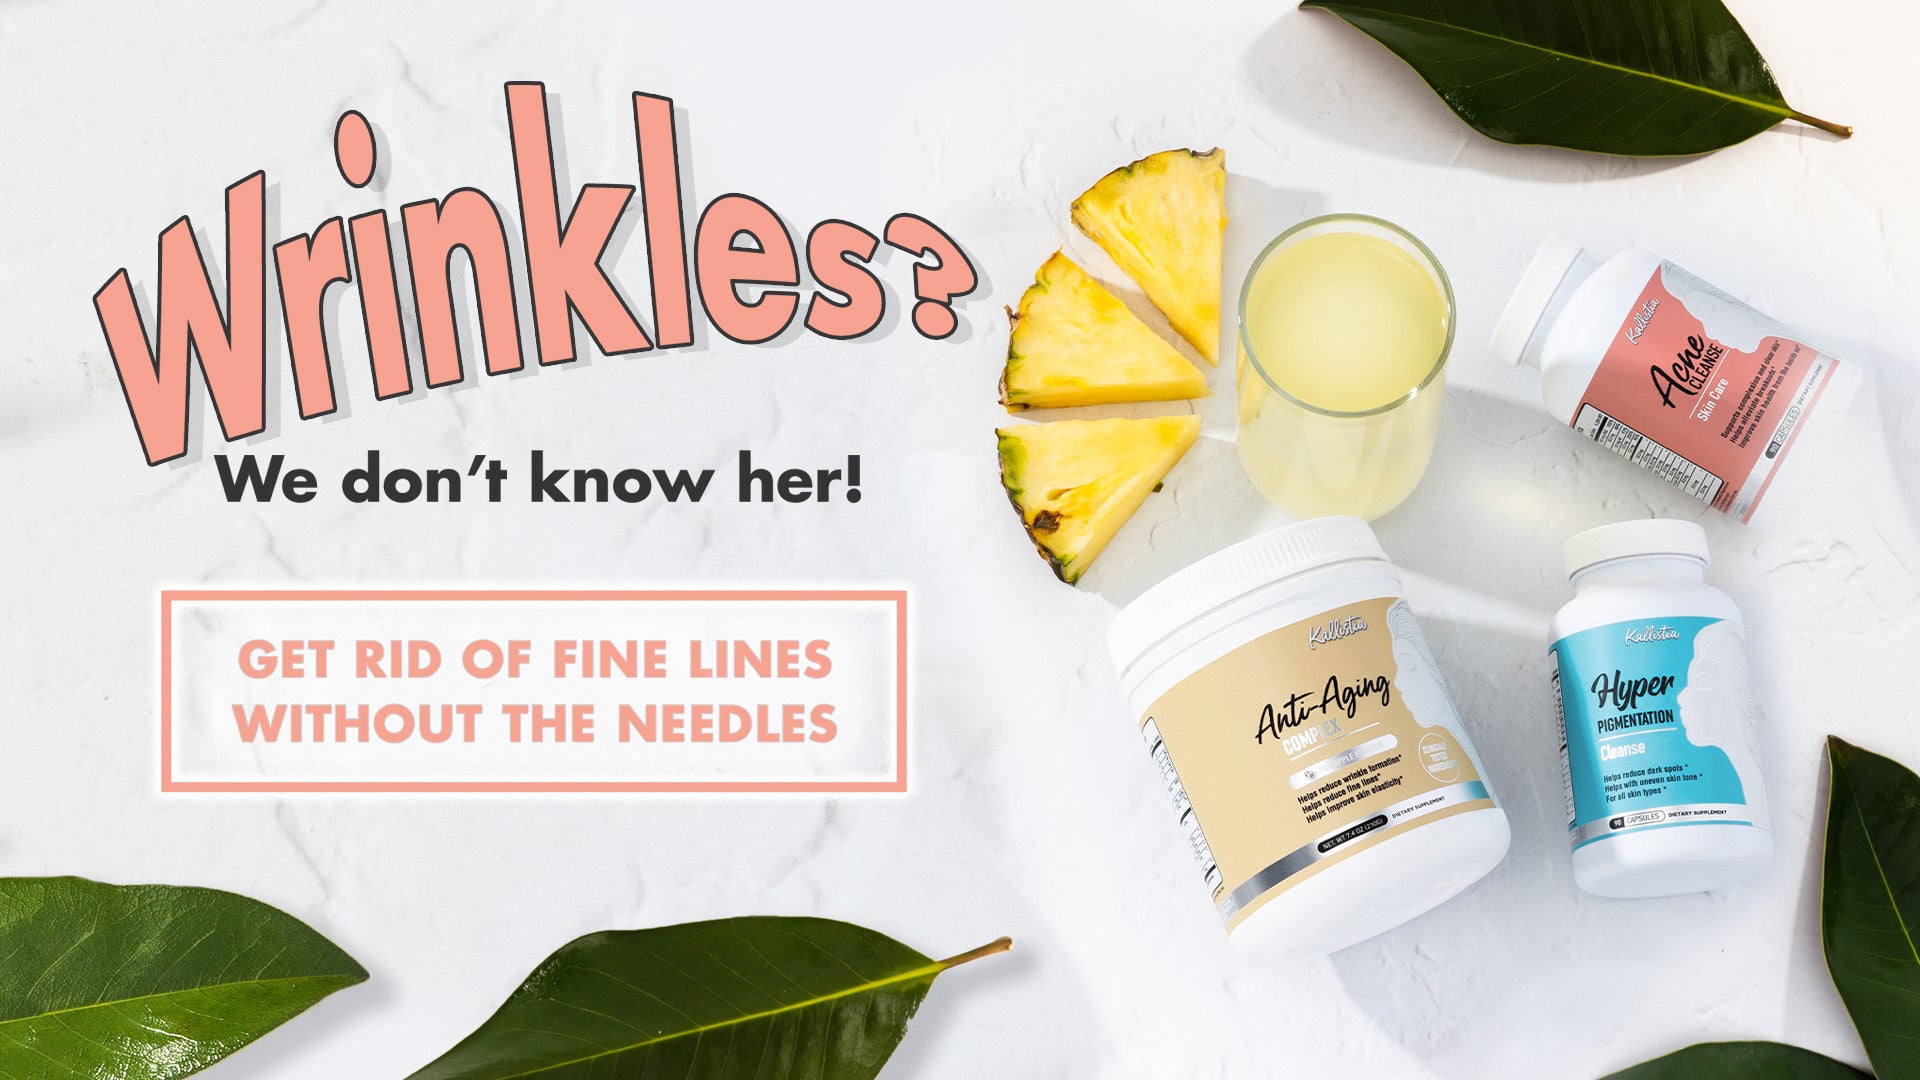 Get rid of wrinkles & fine lines without the needles